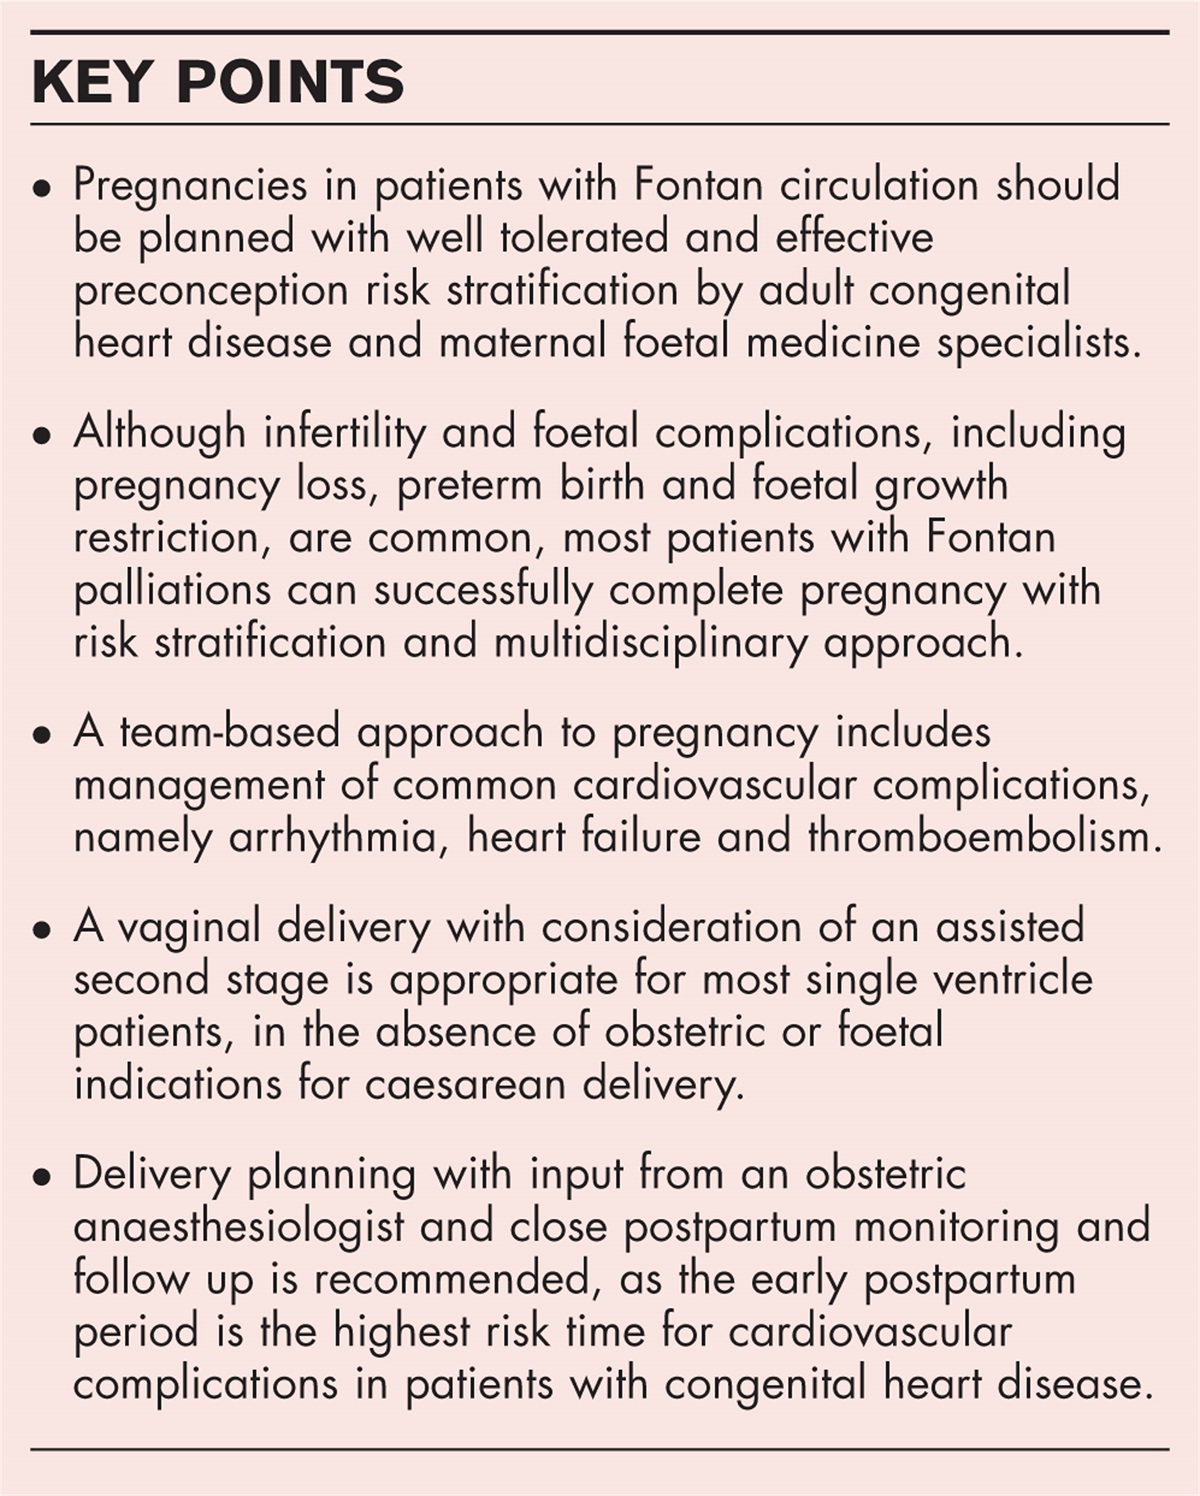 Management of the Fontan patient during pregnancy